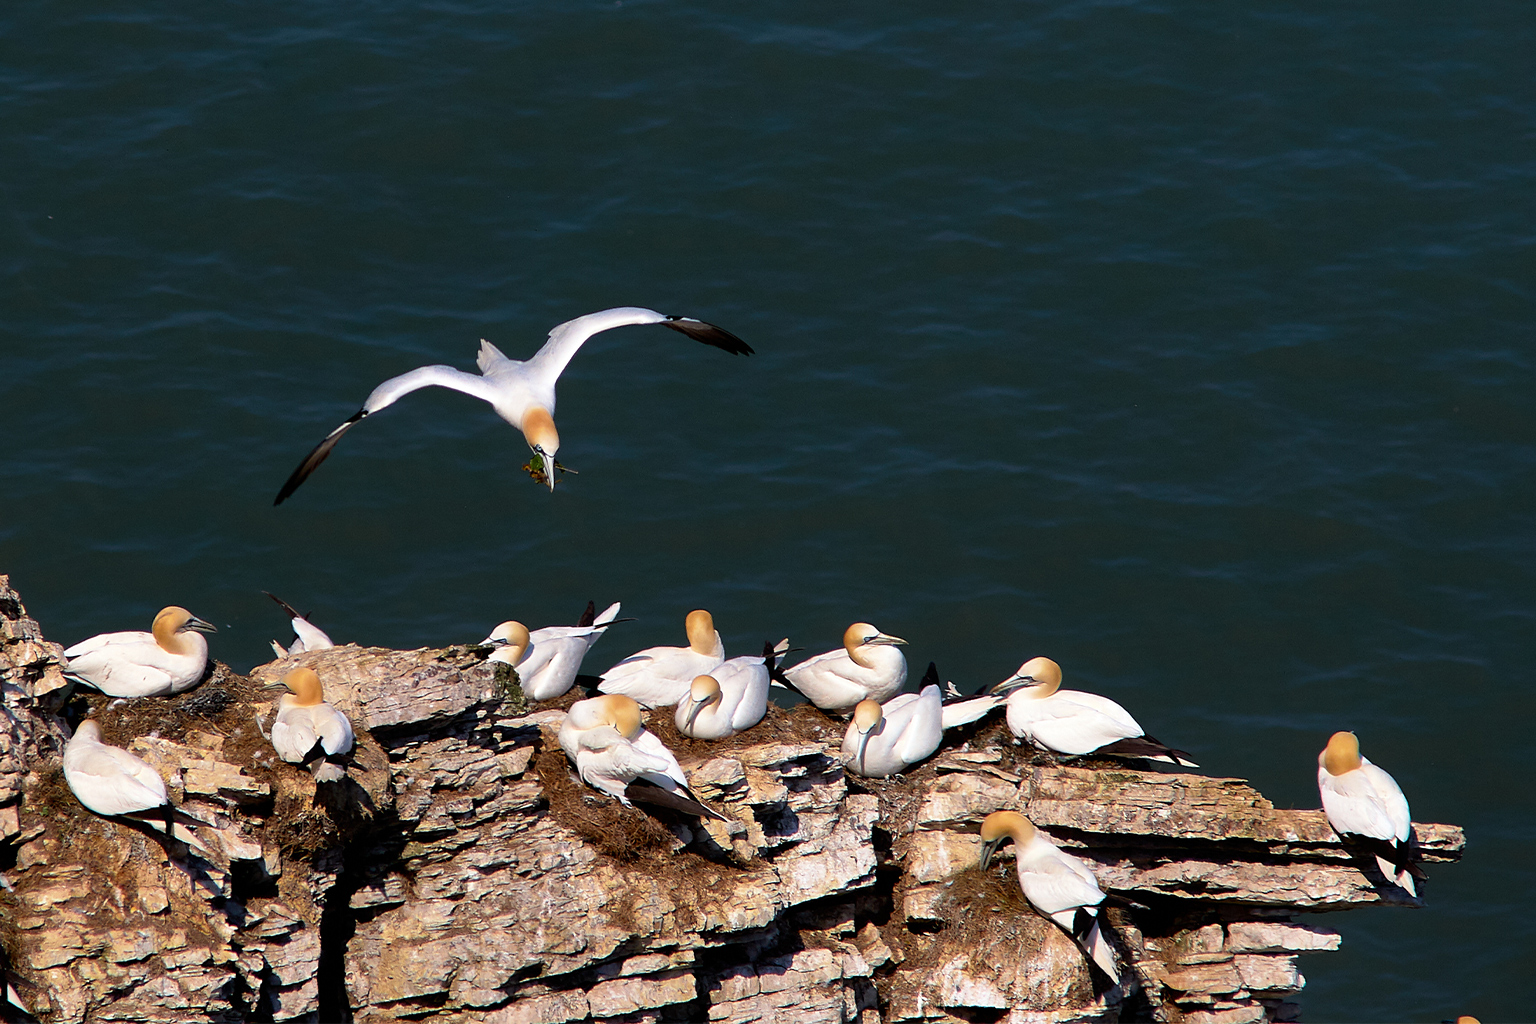 Gannets nesting on a cliff.